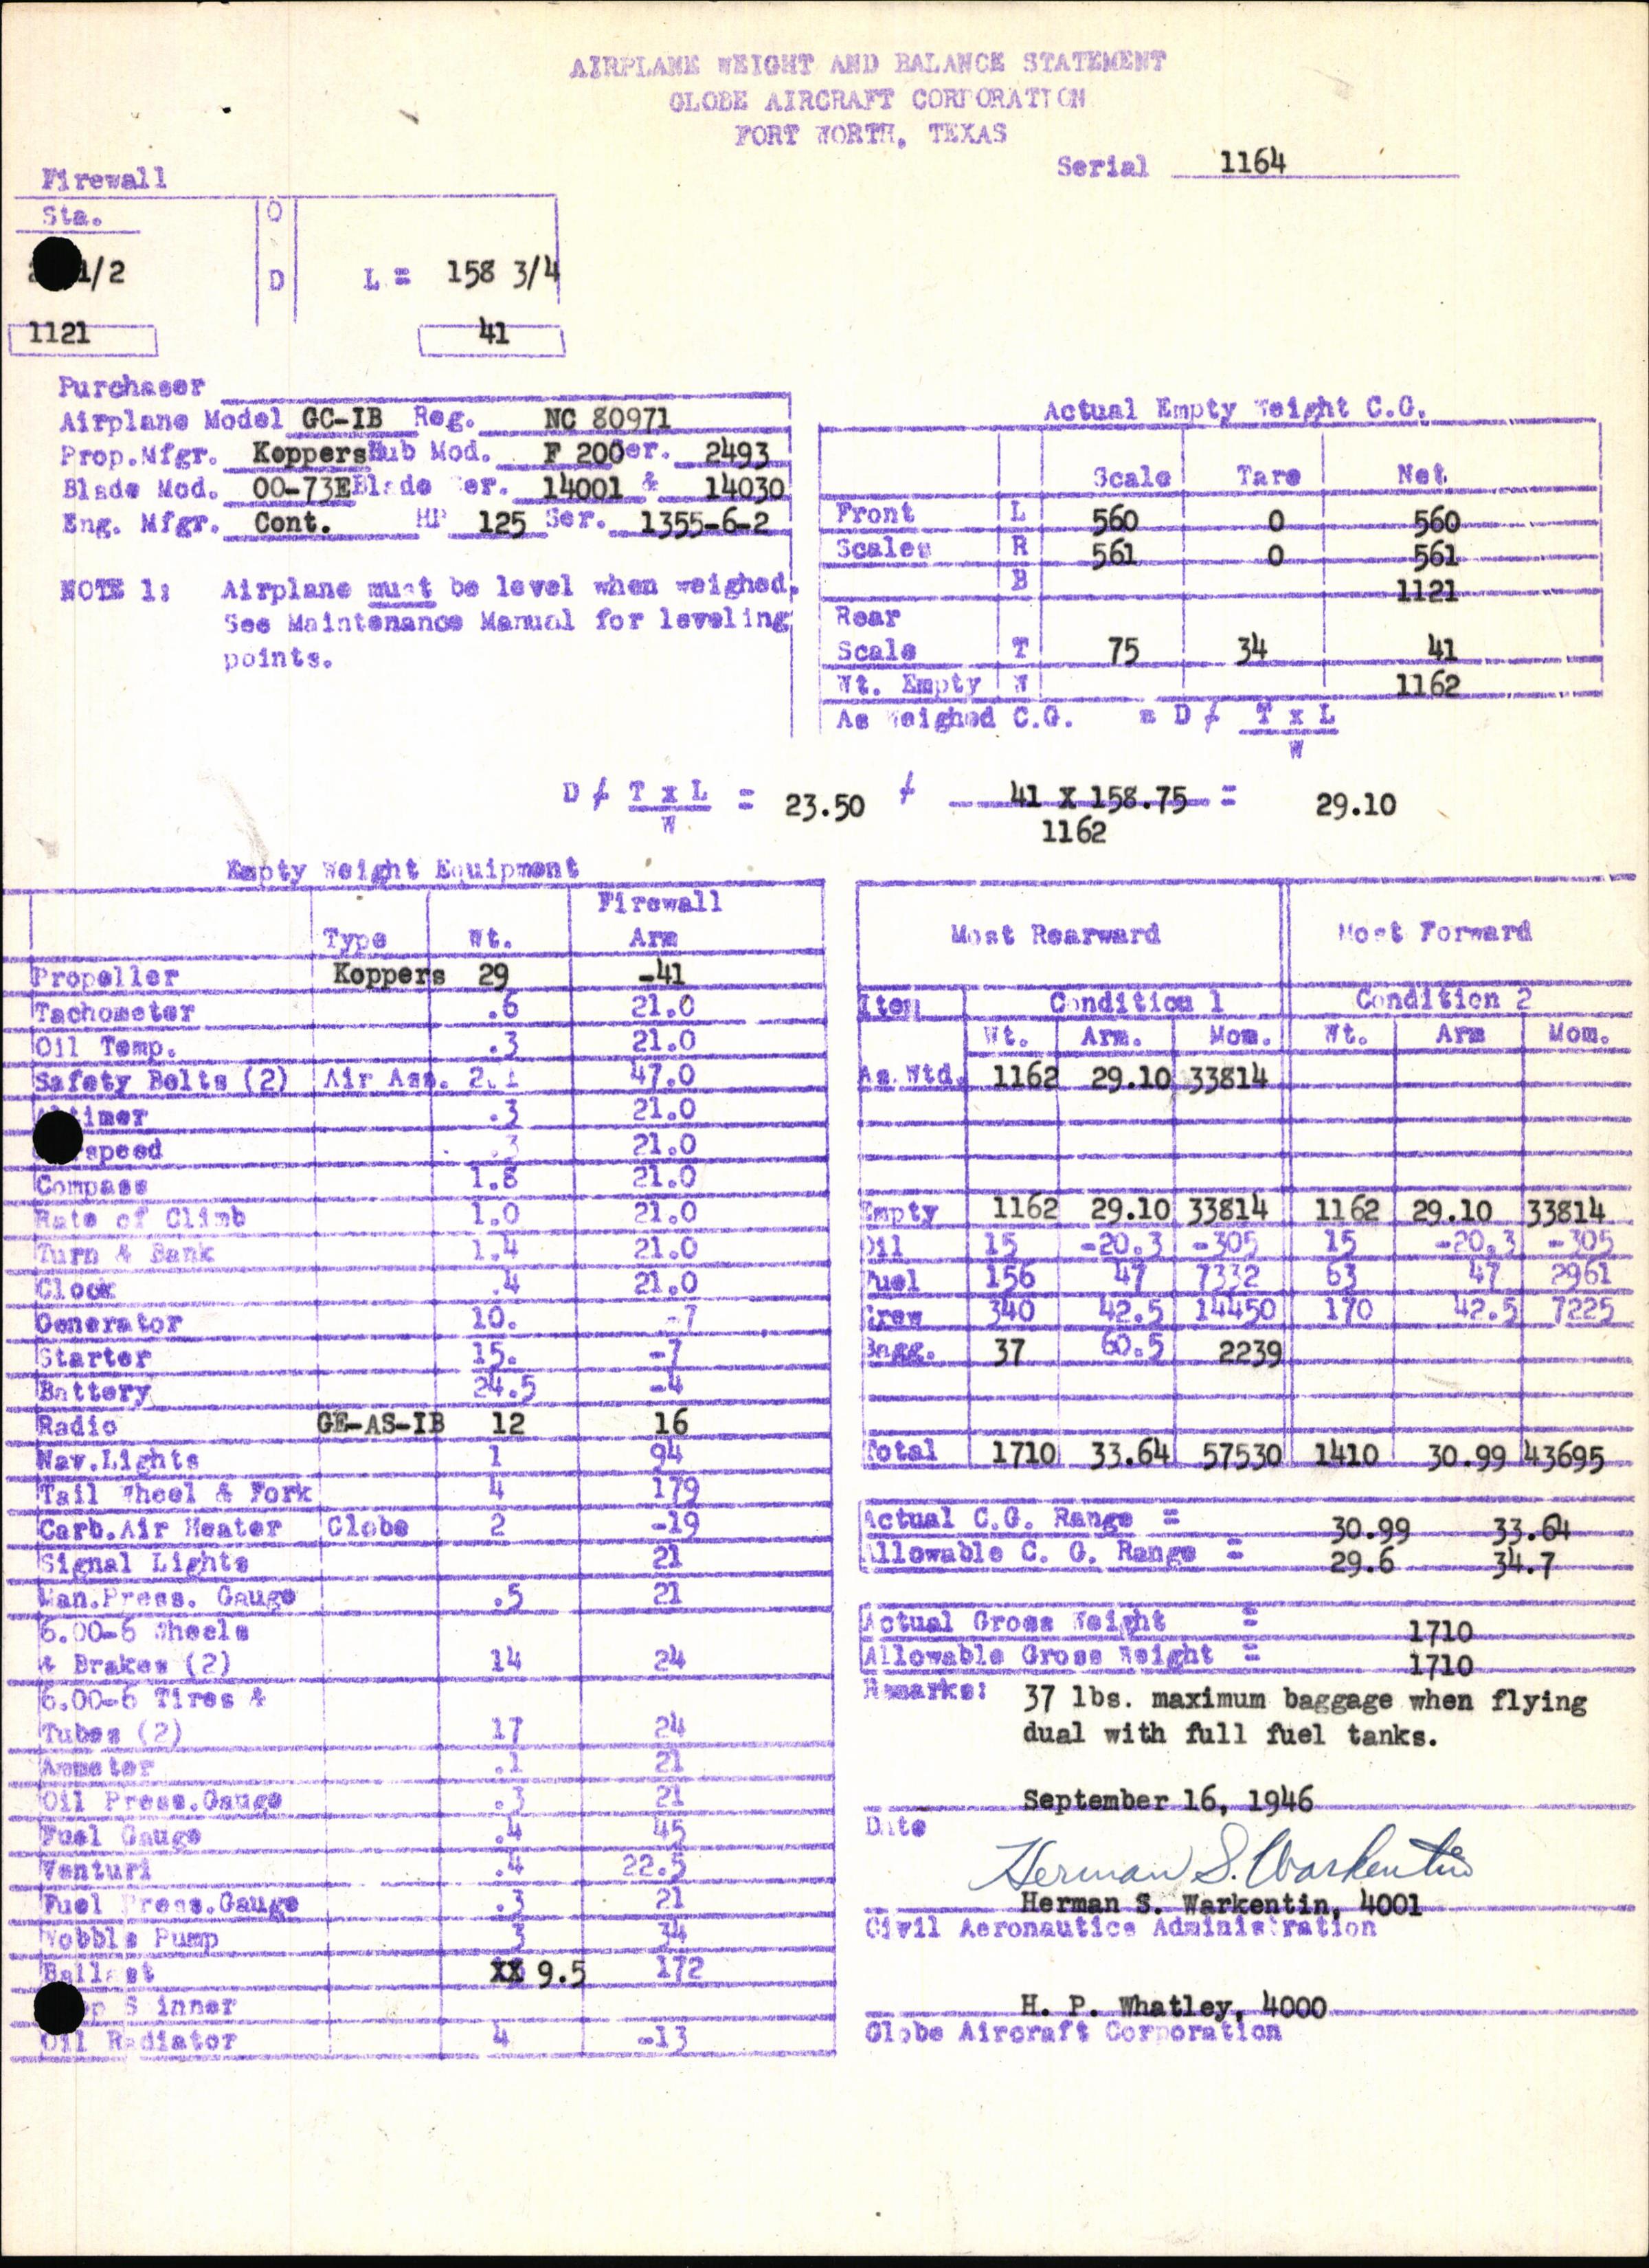 Sample page 5 from AirCorps Library document: Technical Information for Serial Number 1164